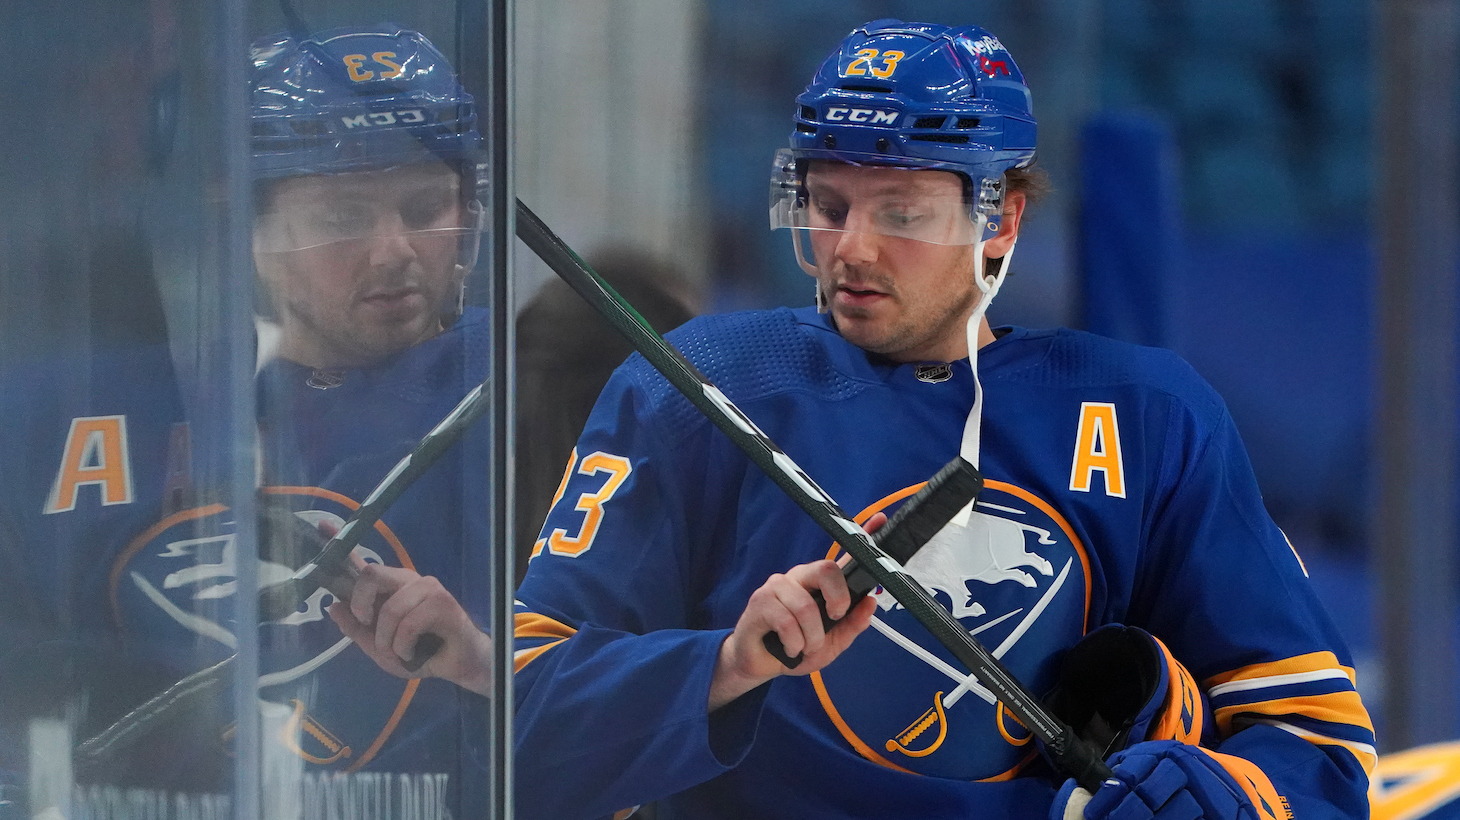 BUFFALO, NY - FEBRUARY 15: Sam Reinhart #23 of the Buffalo Sabres before the game against the New York Islanders at KeyBank Center on February 15, 2021 in Buffalo, New York. (Photo by Kevin Hoffman/Getty Images)